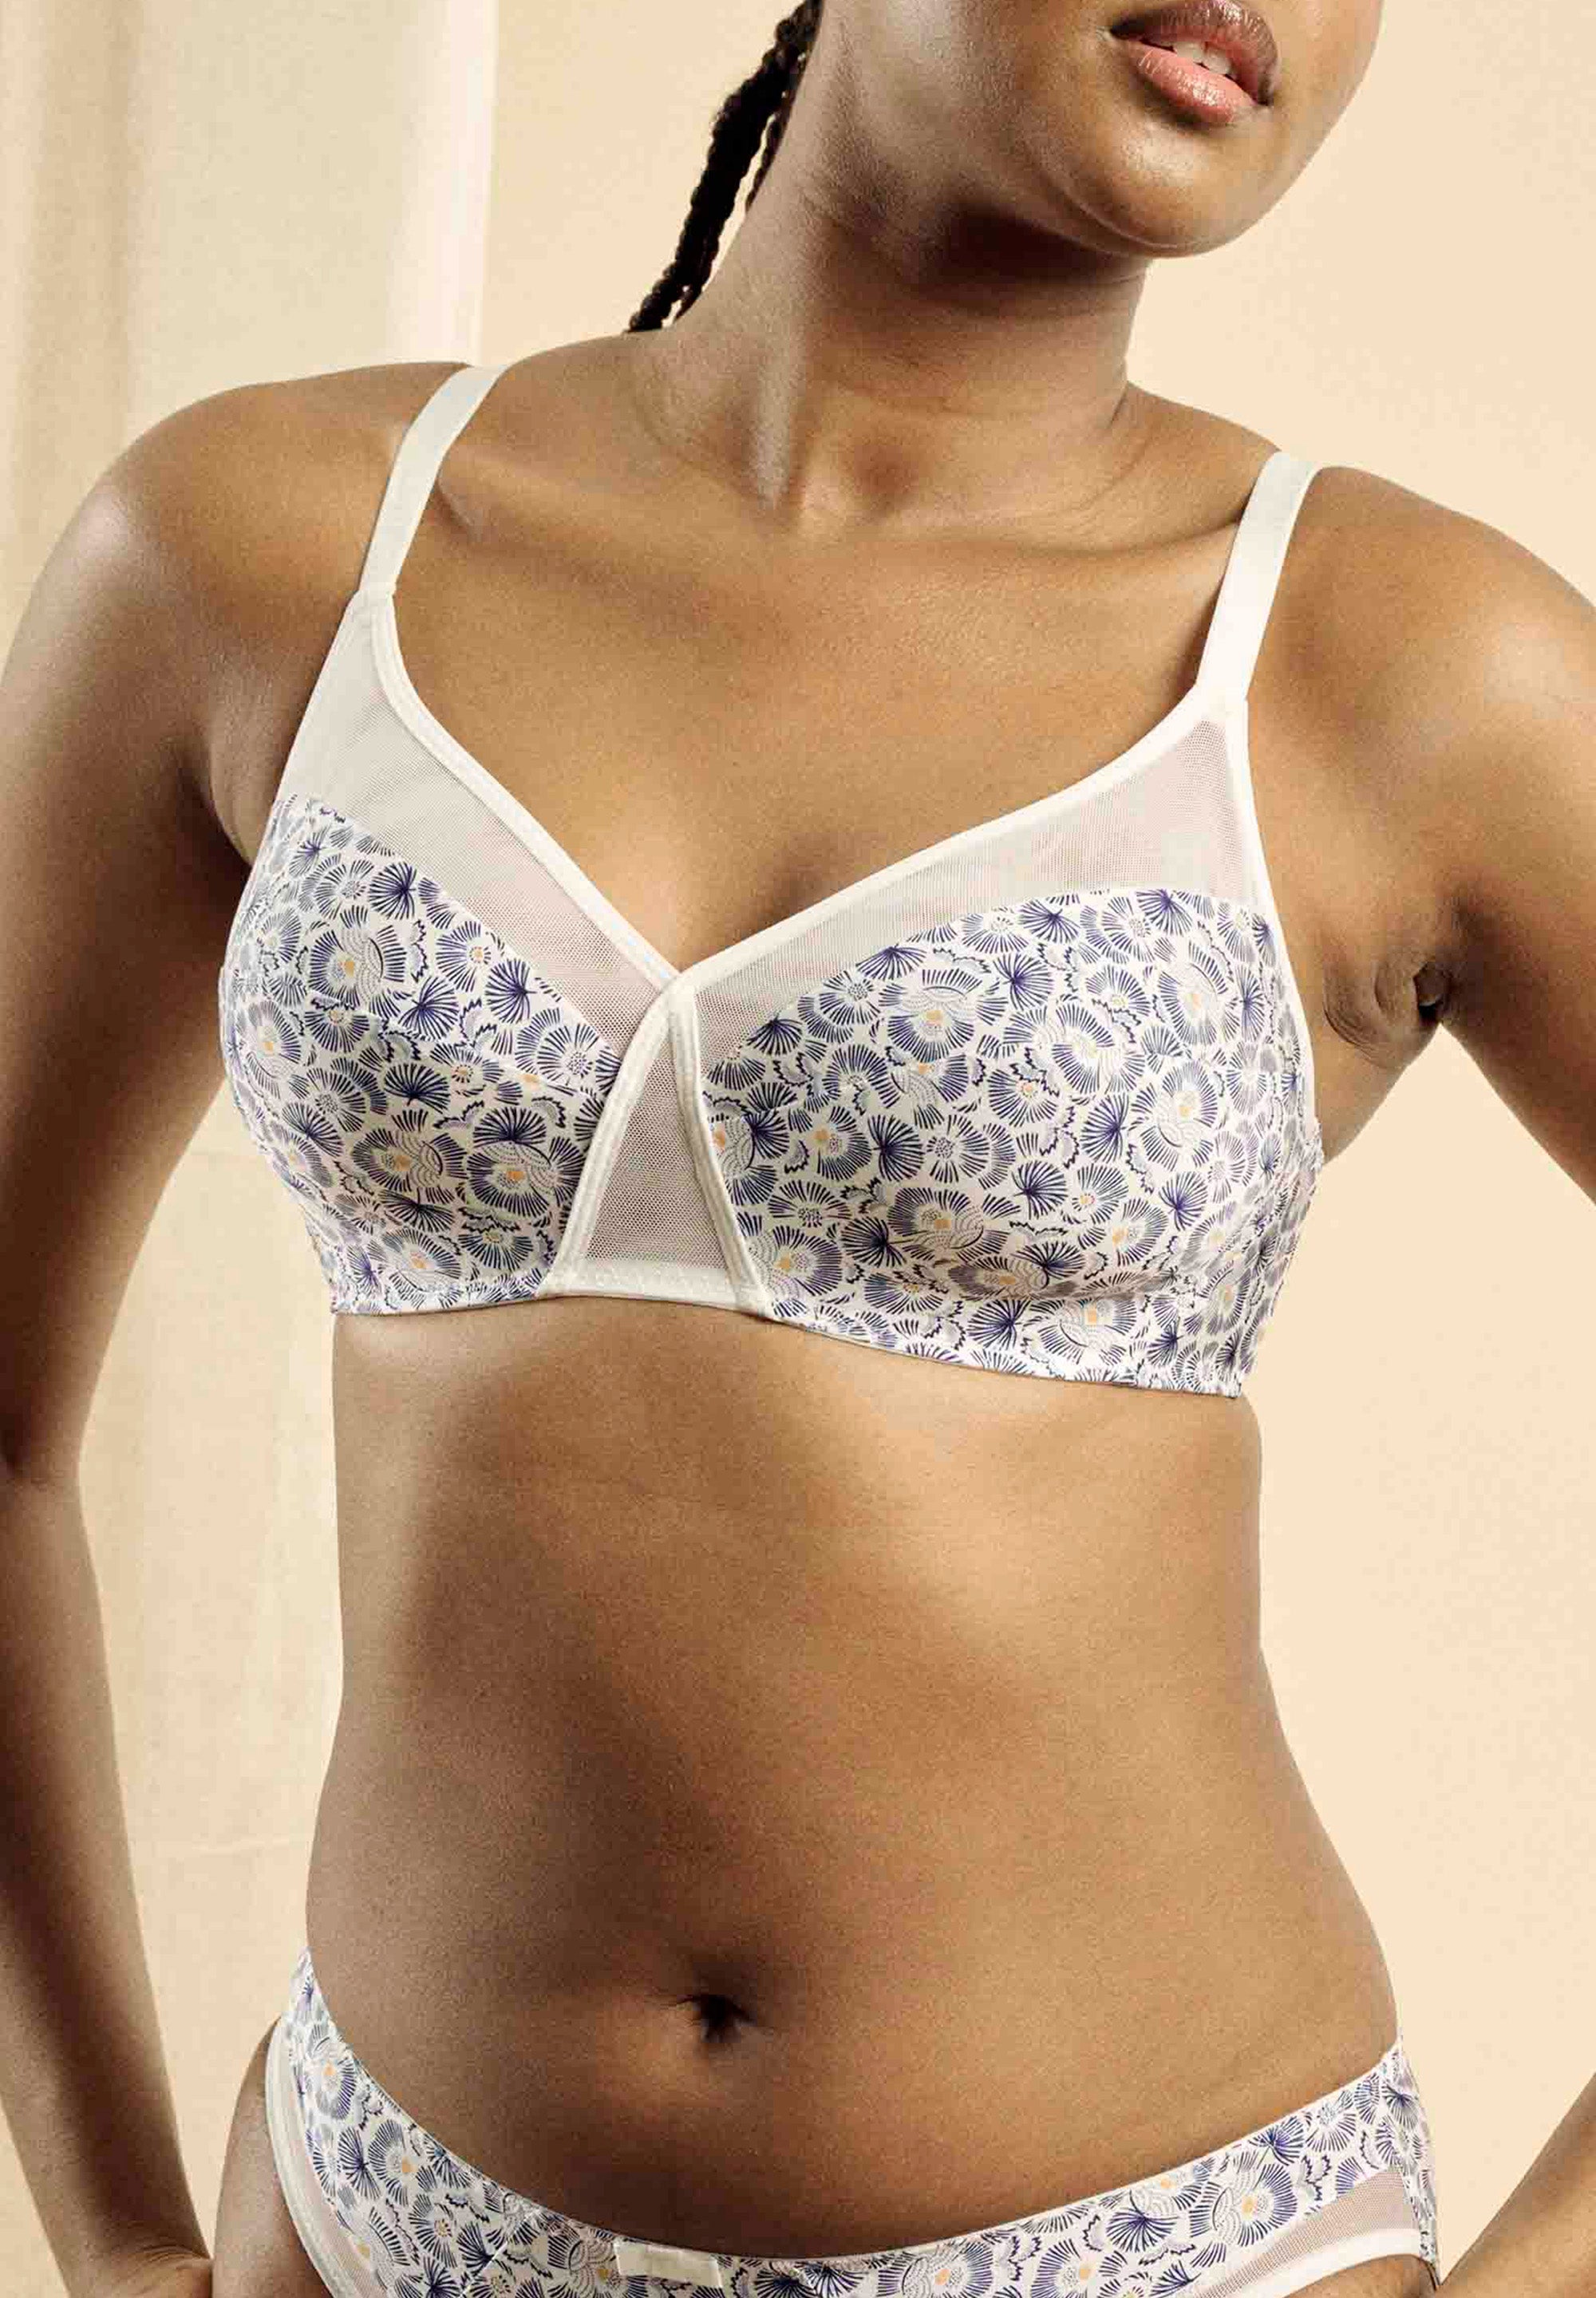 Full cup wireless bra Complice Ivory & Blue Floral Print